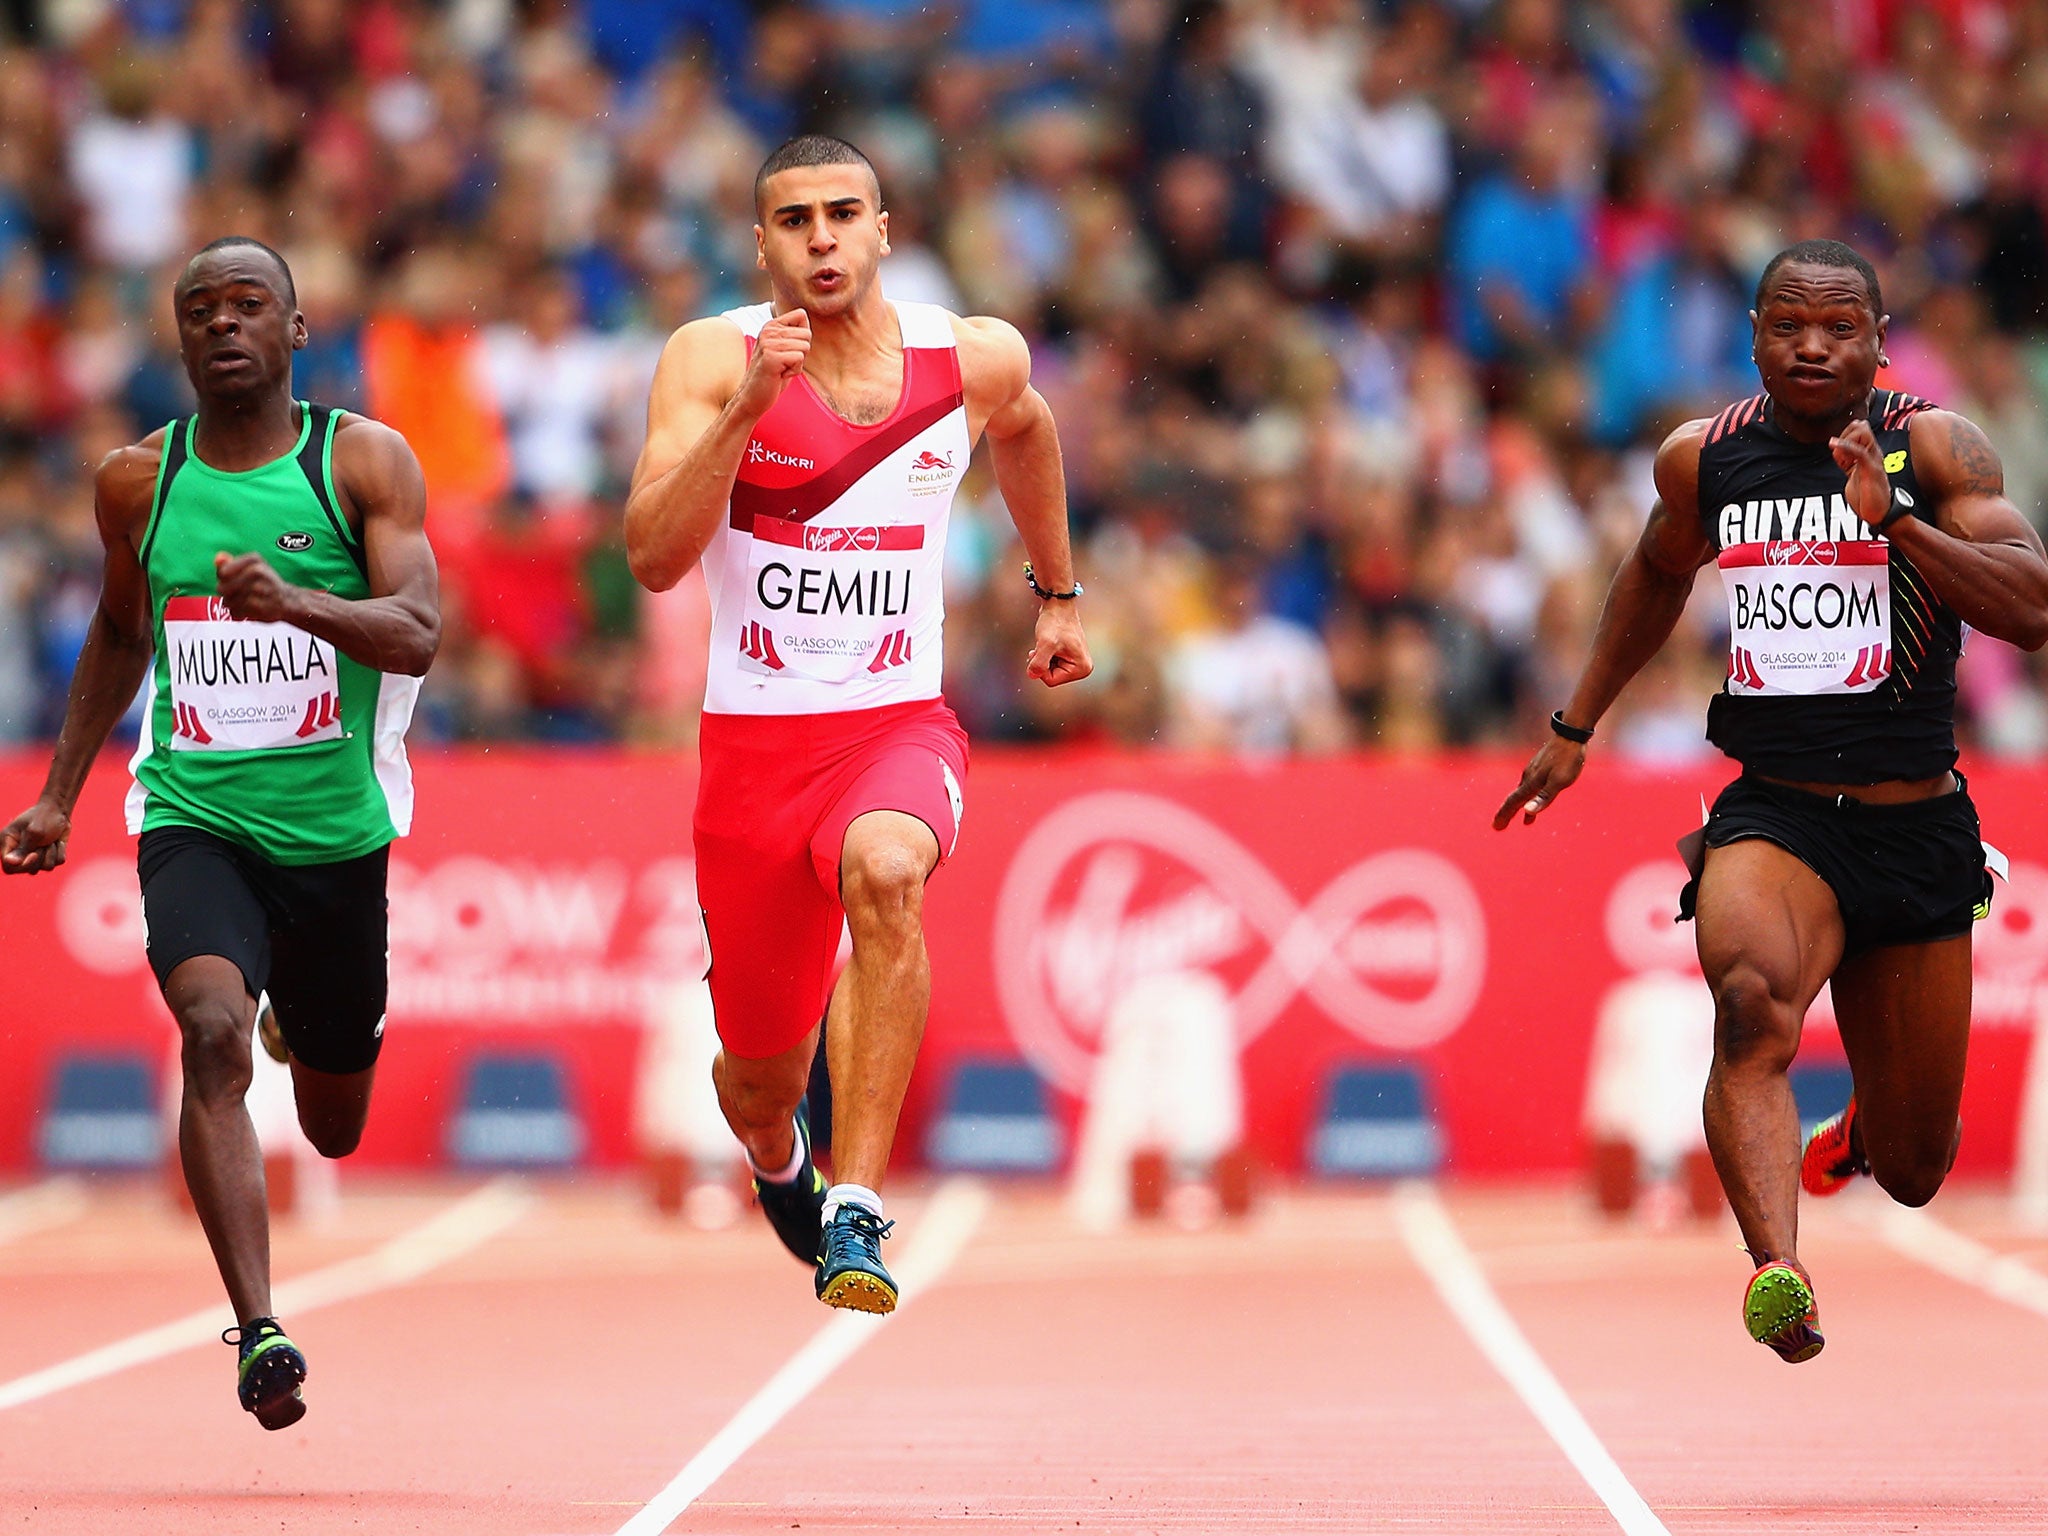 Adam Gemili, centre, on his way to recording the fastest time in the 100m heats in Glasgow